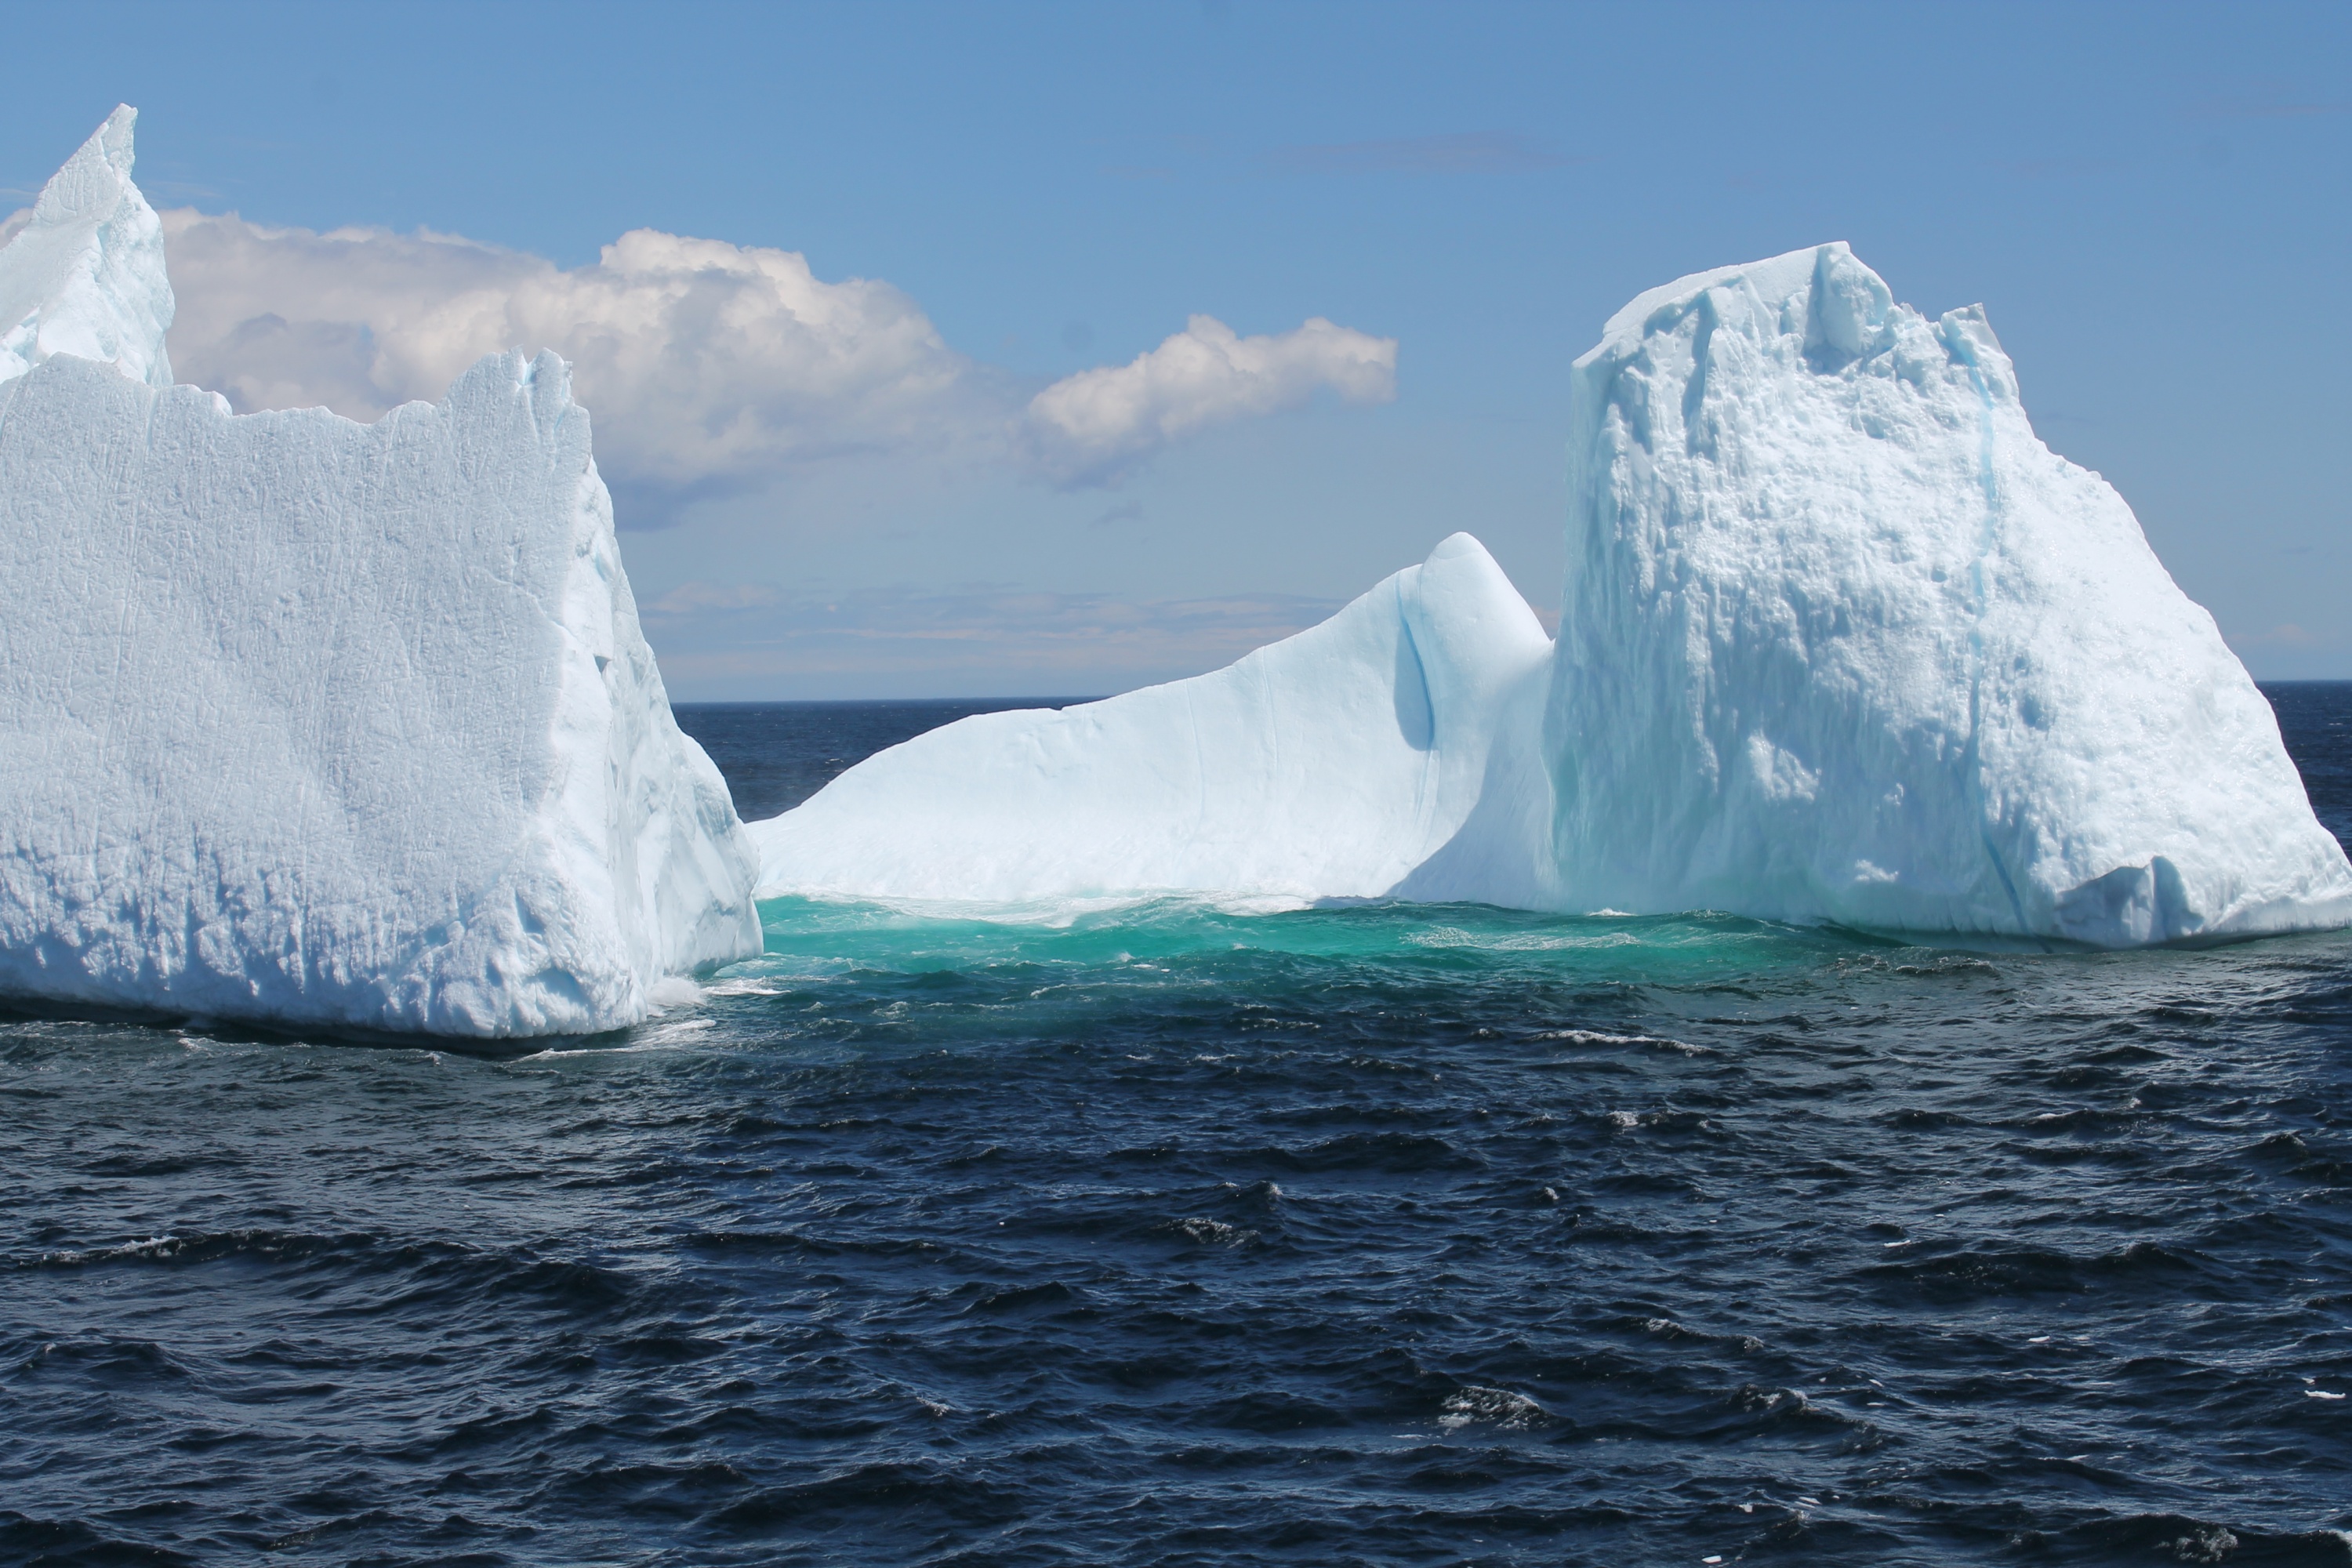 Icebergs in the Labrador Sea off the coast of Greenland (photo by Filippos Tagklis, a graduate student in the School of Earth and Atmospheric Sciences).